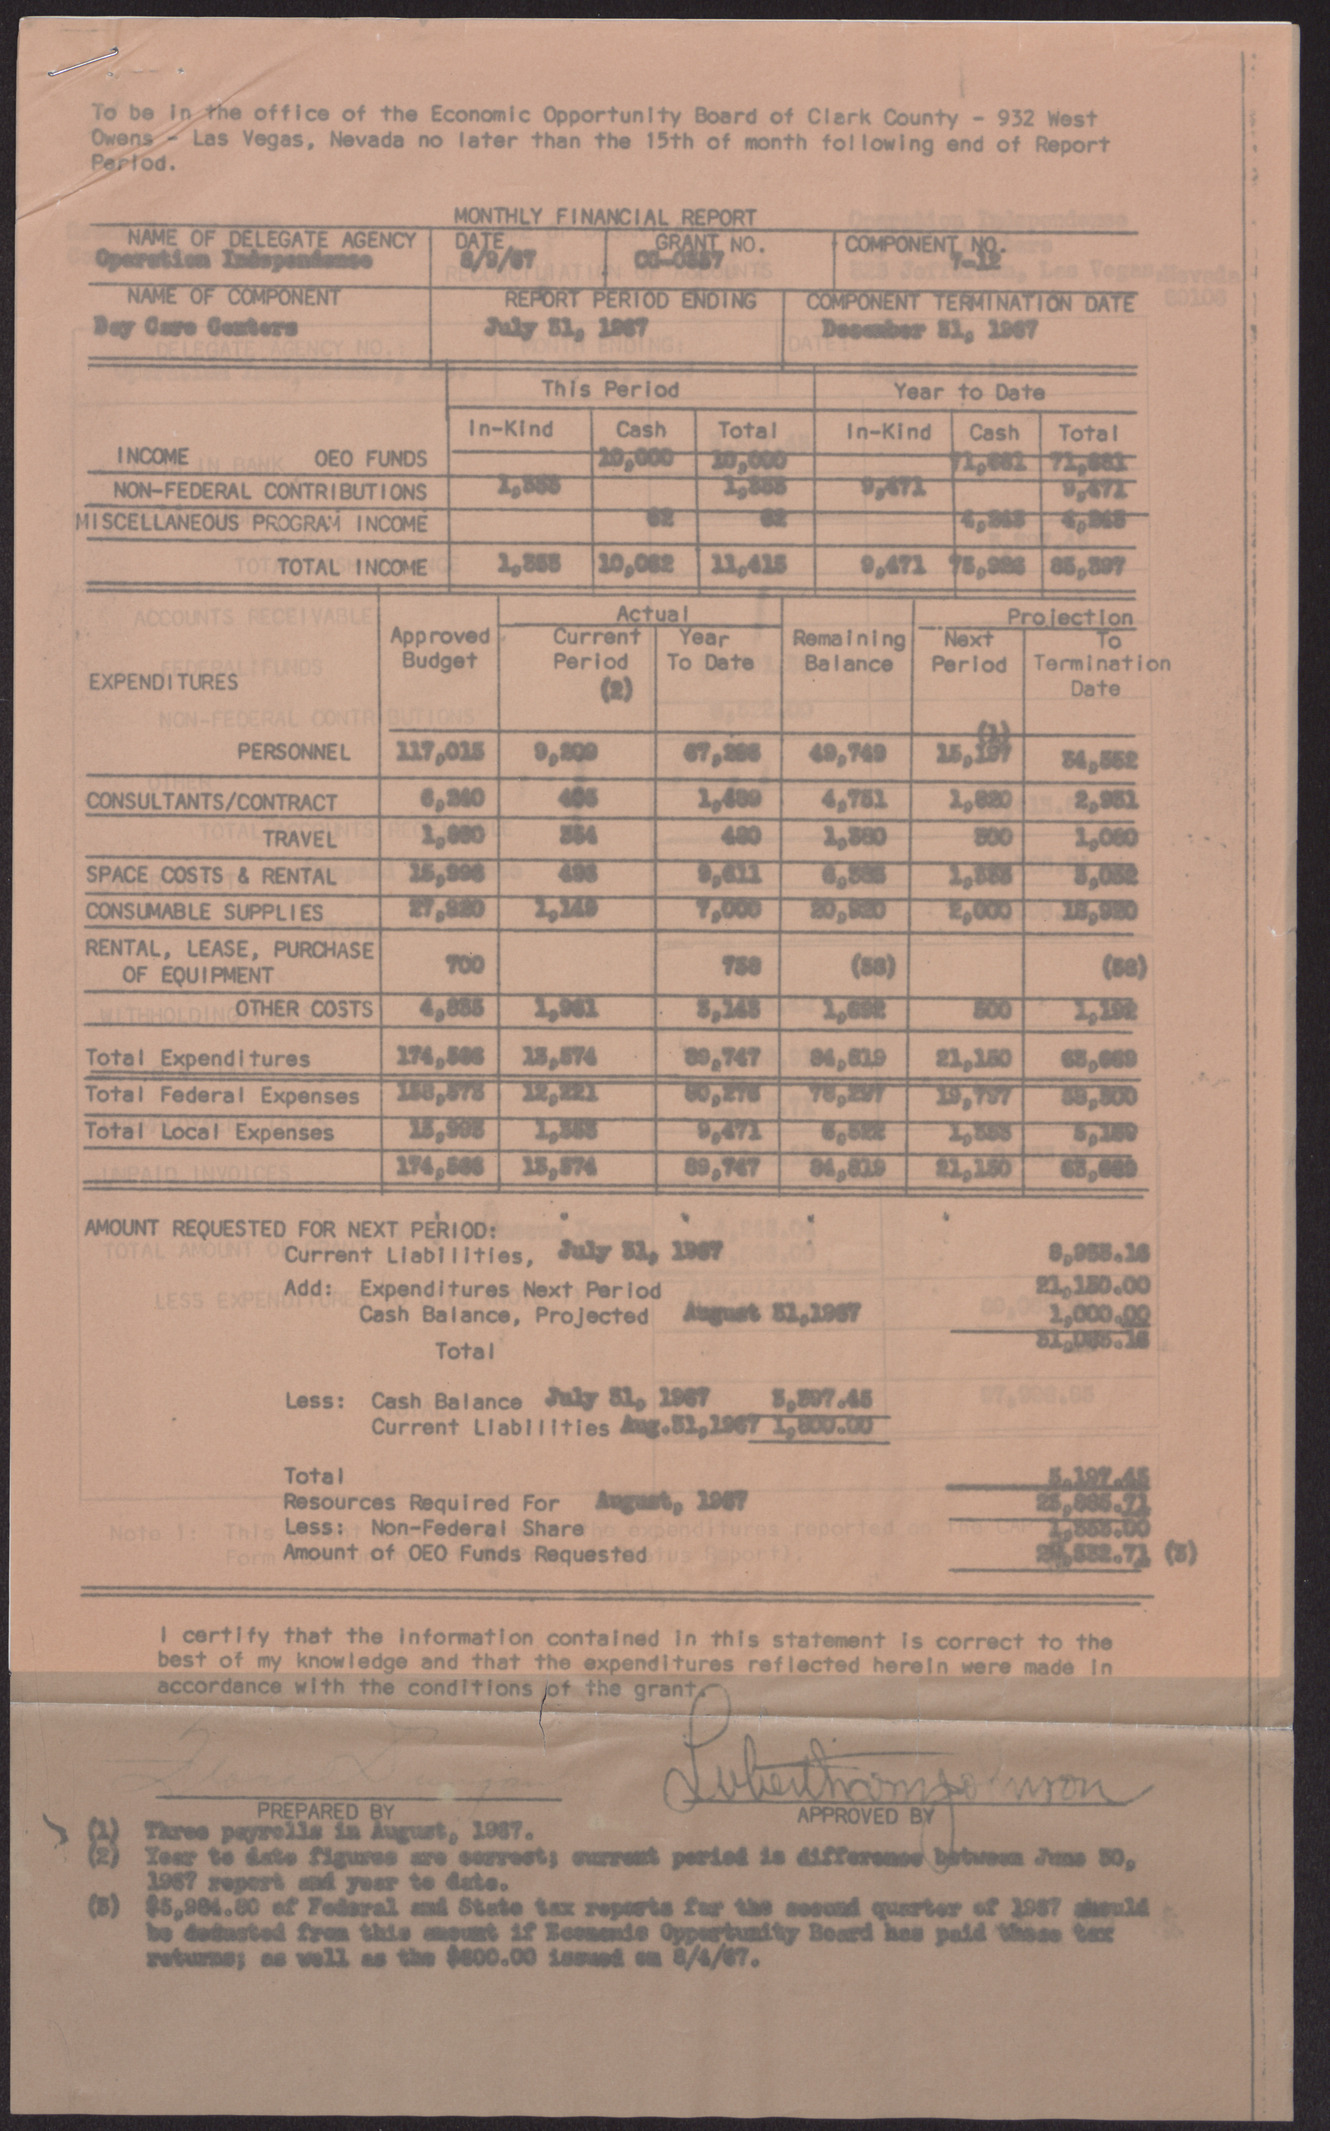 Letter from Flora Dungan and accompanying statements of Receipts and Expenditures and Budgeted and Actual Expenditures (5 pages), August 9, 1967, page 2